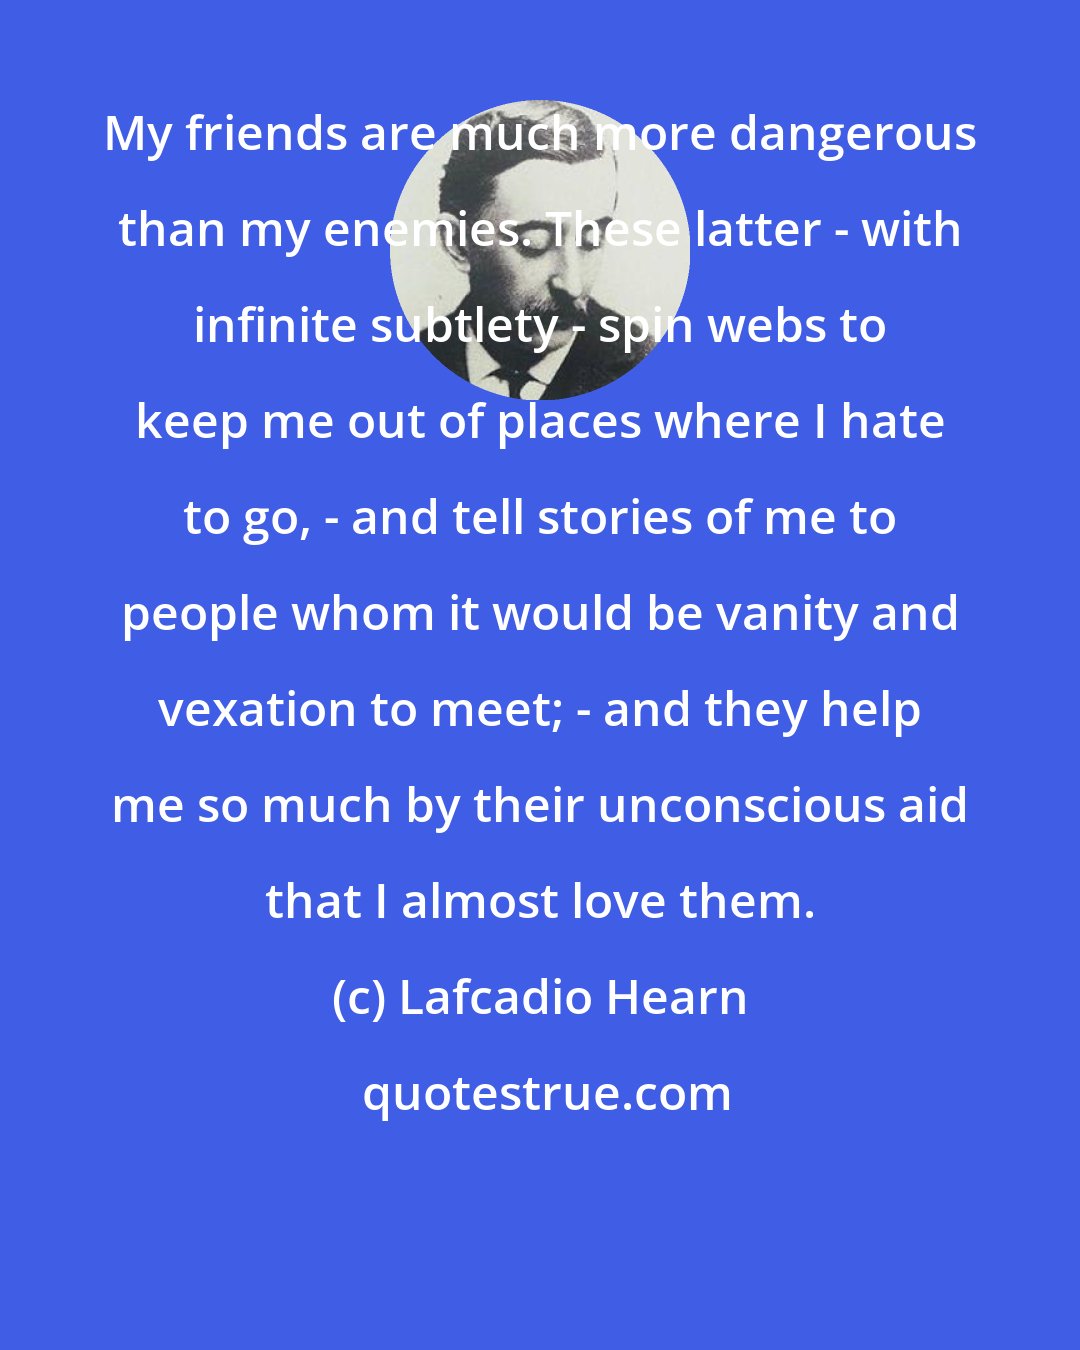 Lafcadio Hearn: My friends are much more dangerous than my enemies. These latter - with infinite subtlety - spin webs to keep me out of places where I hate to go, - and tell stories of me to people whom it would be vanity and vexation to meet; - and they help me so much by their unconscious aid that I almost love them.